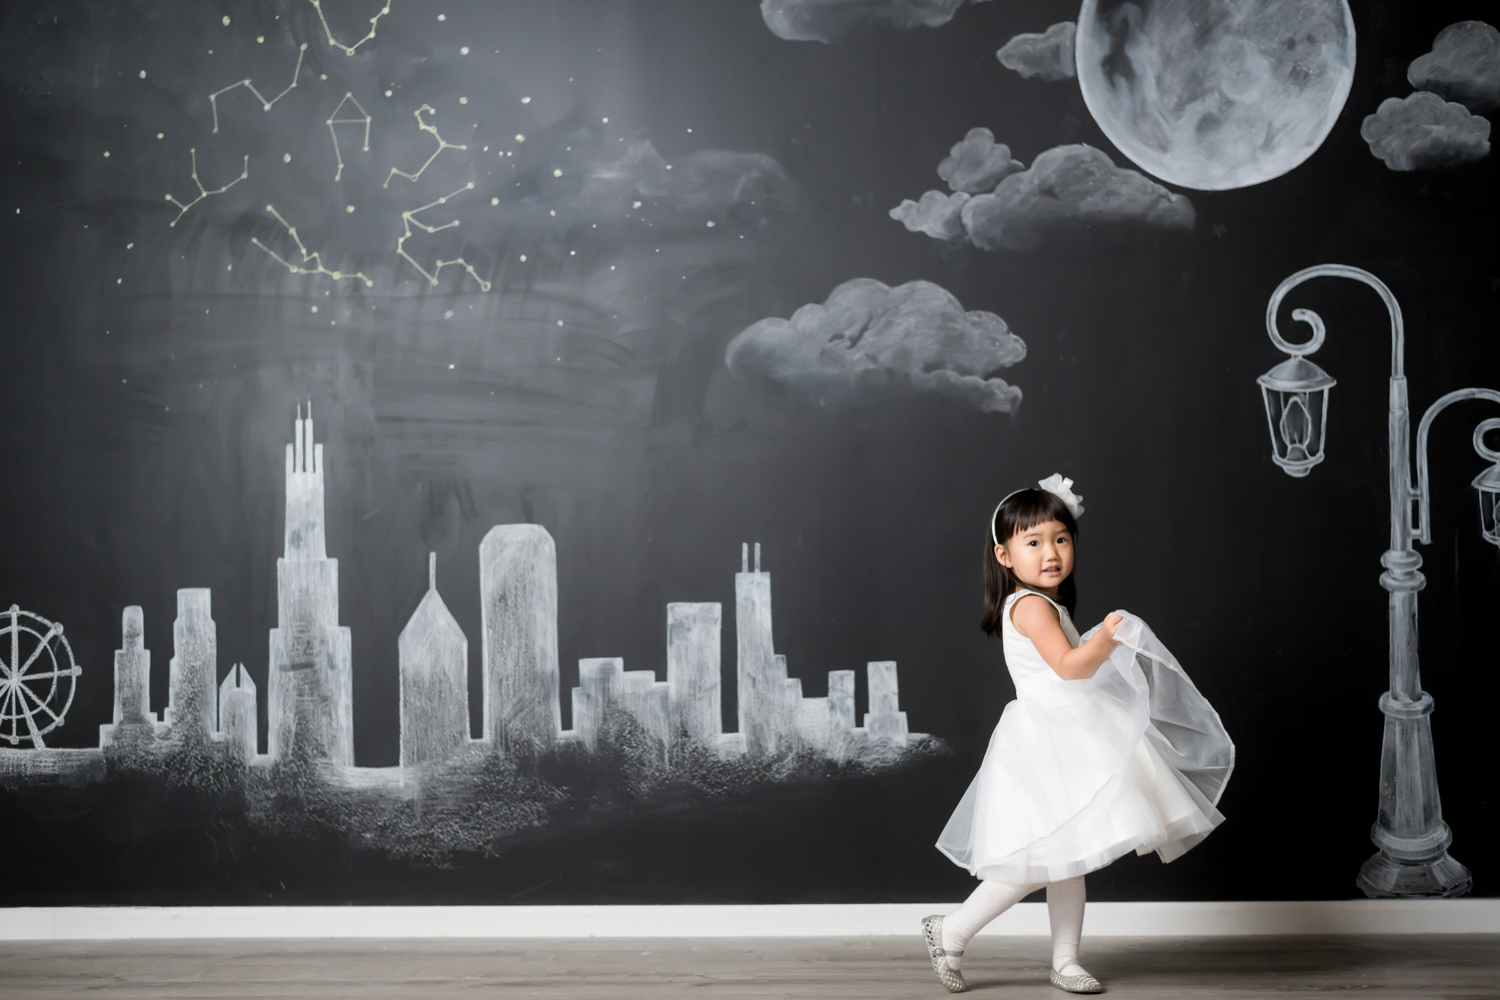 Hyorin holds her dress and dances in front of a chalk Chicago skyline mural.